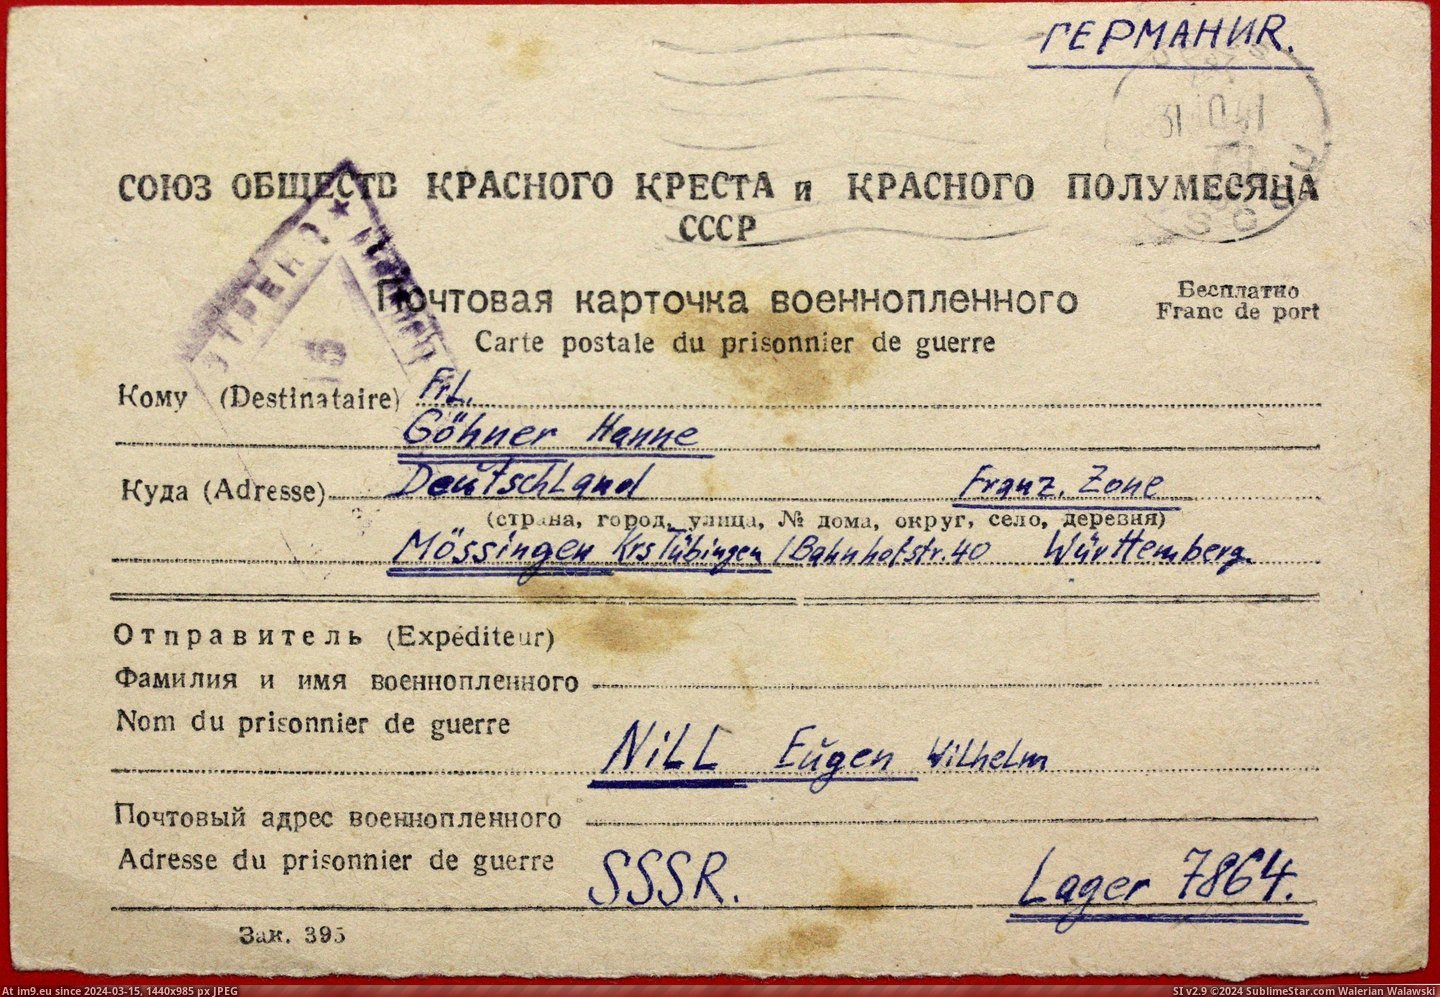 #Grandfather #Allowed #Postcard #Write #Imprisonment #Camp #Soviet [Pics] During my grandfather's imprisonment in a Soviet POW camp, he was only allowed to write the occasional postcard to his fi Pic. (Image of album My r/PICS favs))